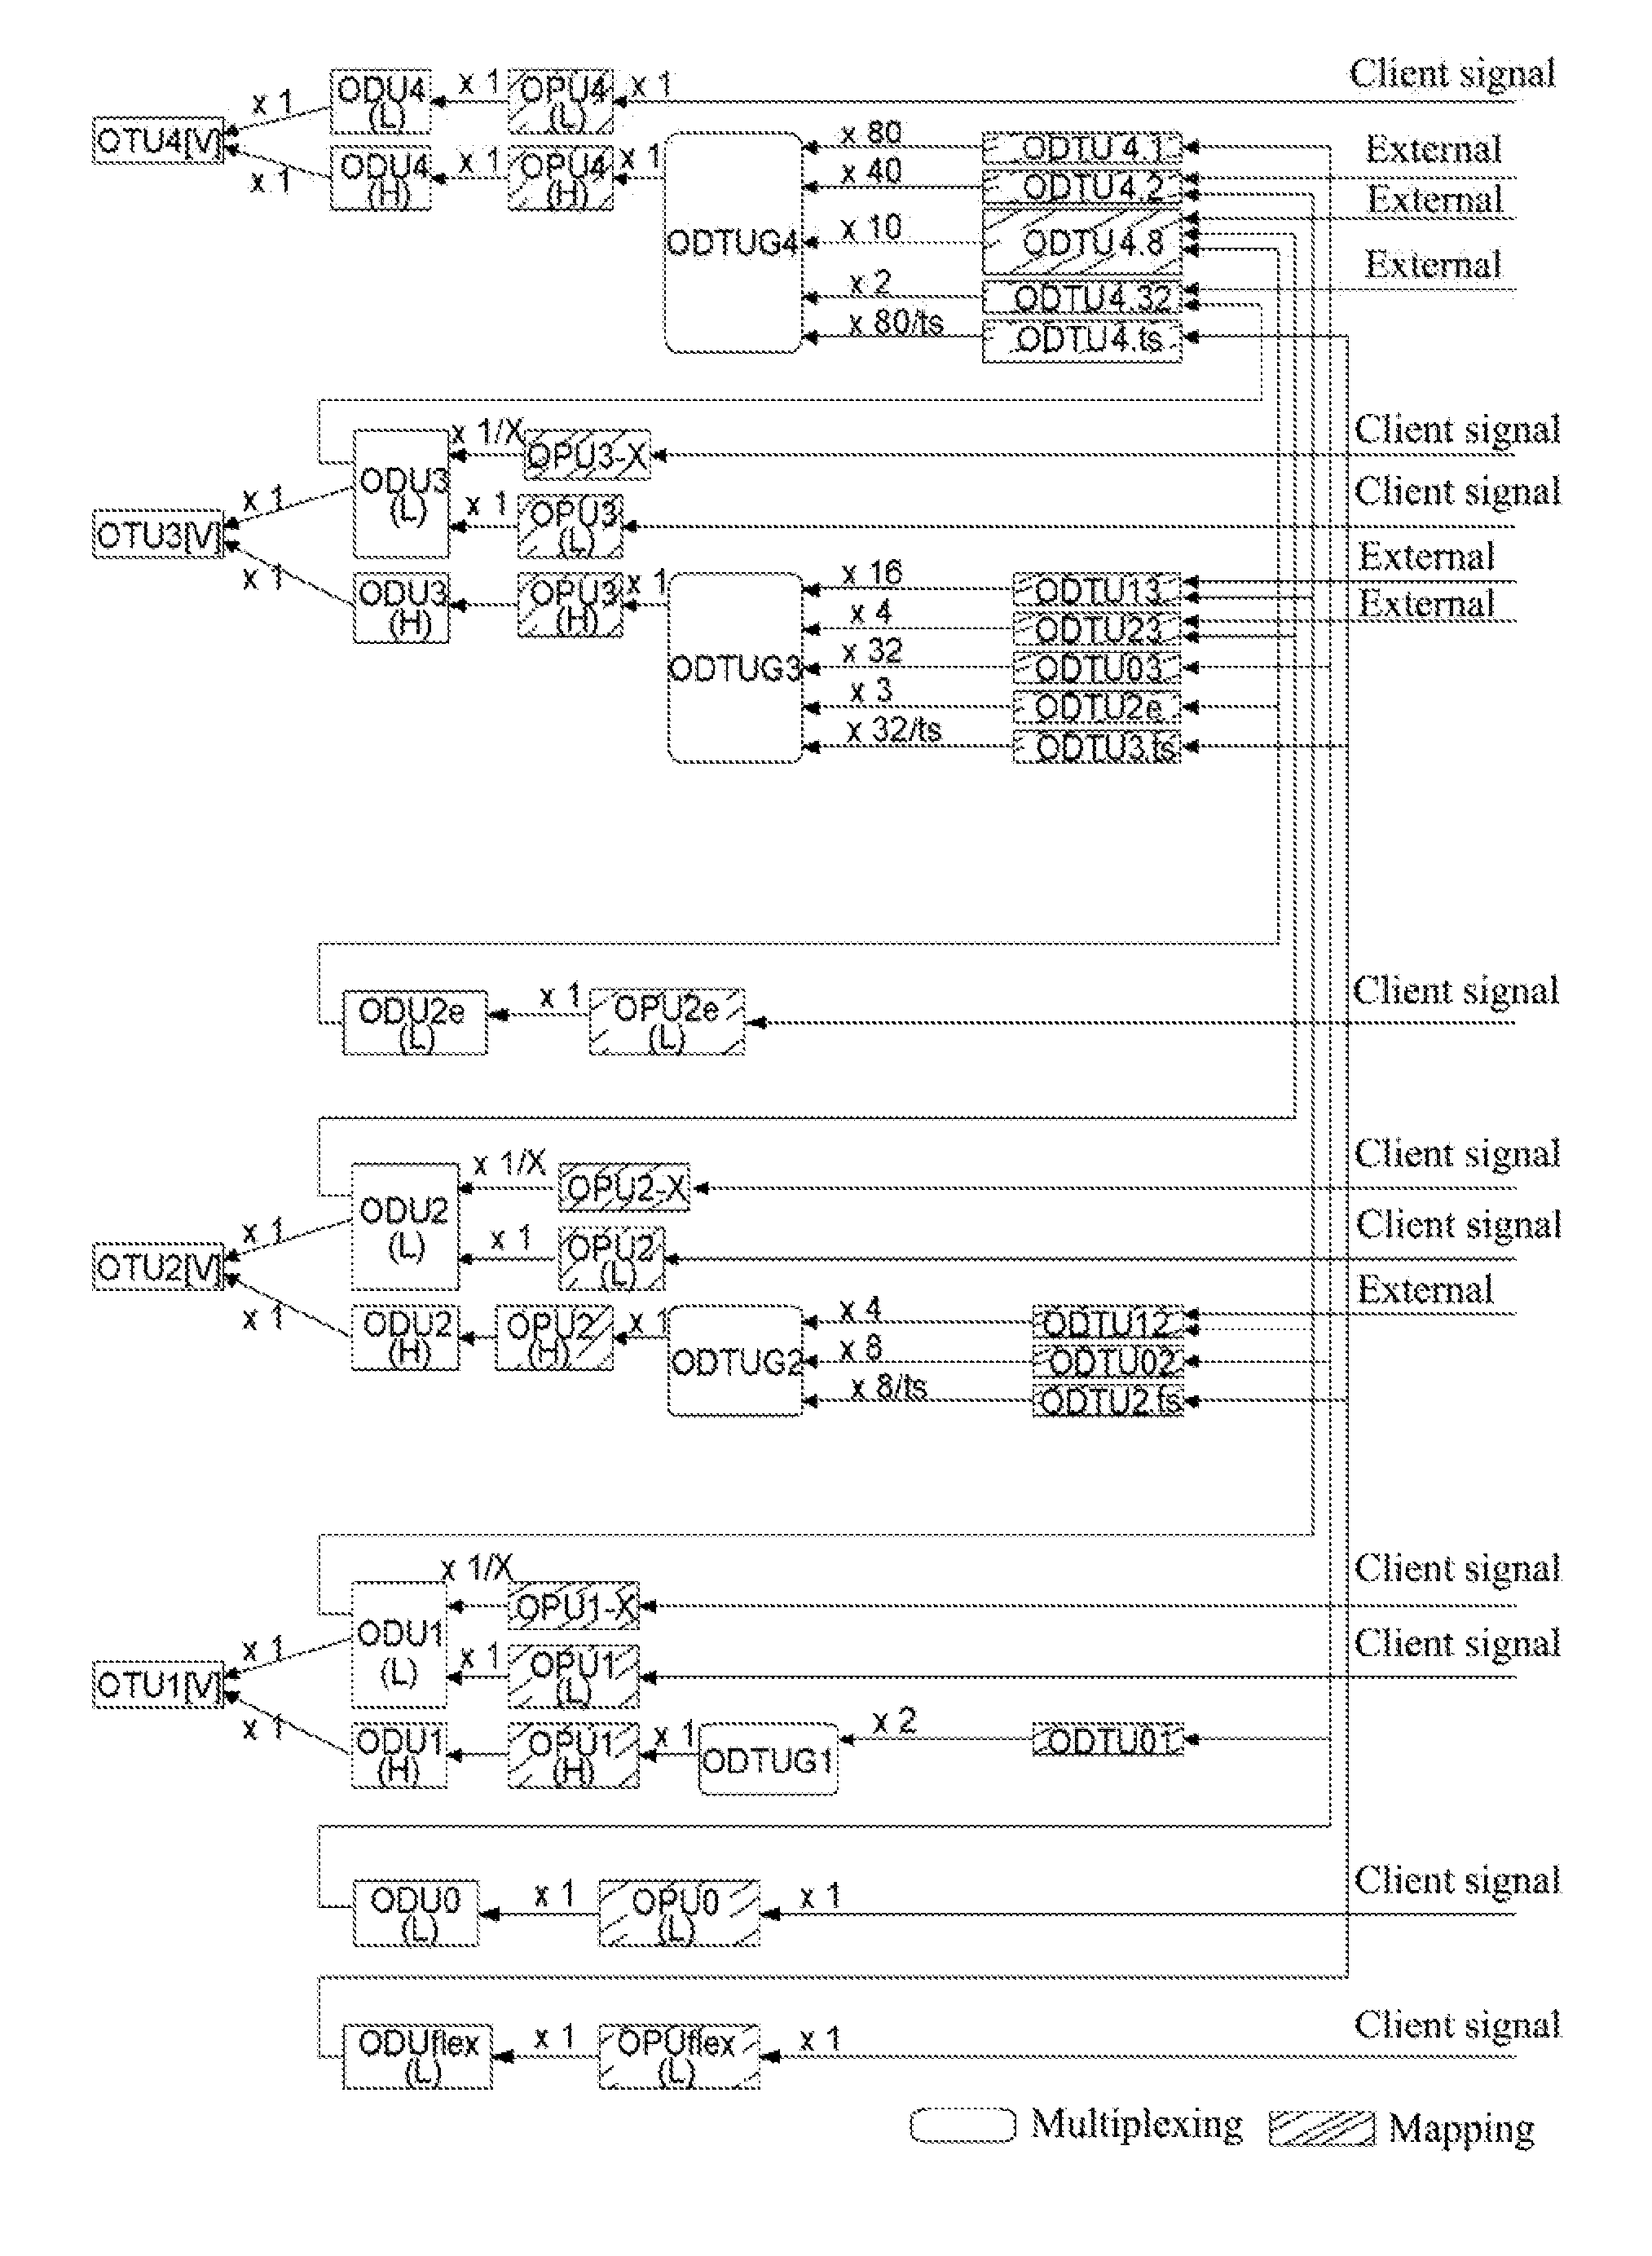 Signaling Control Method and System for Service Establishment Based on G.709